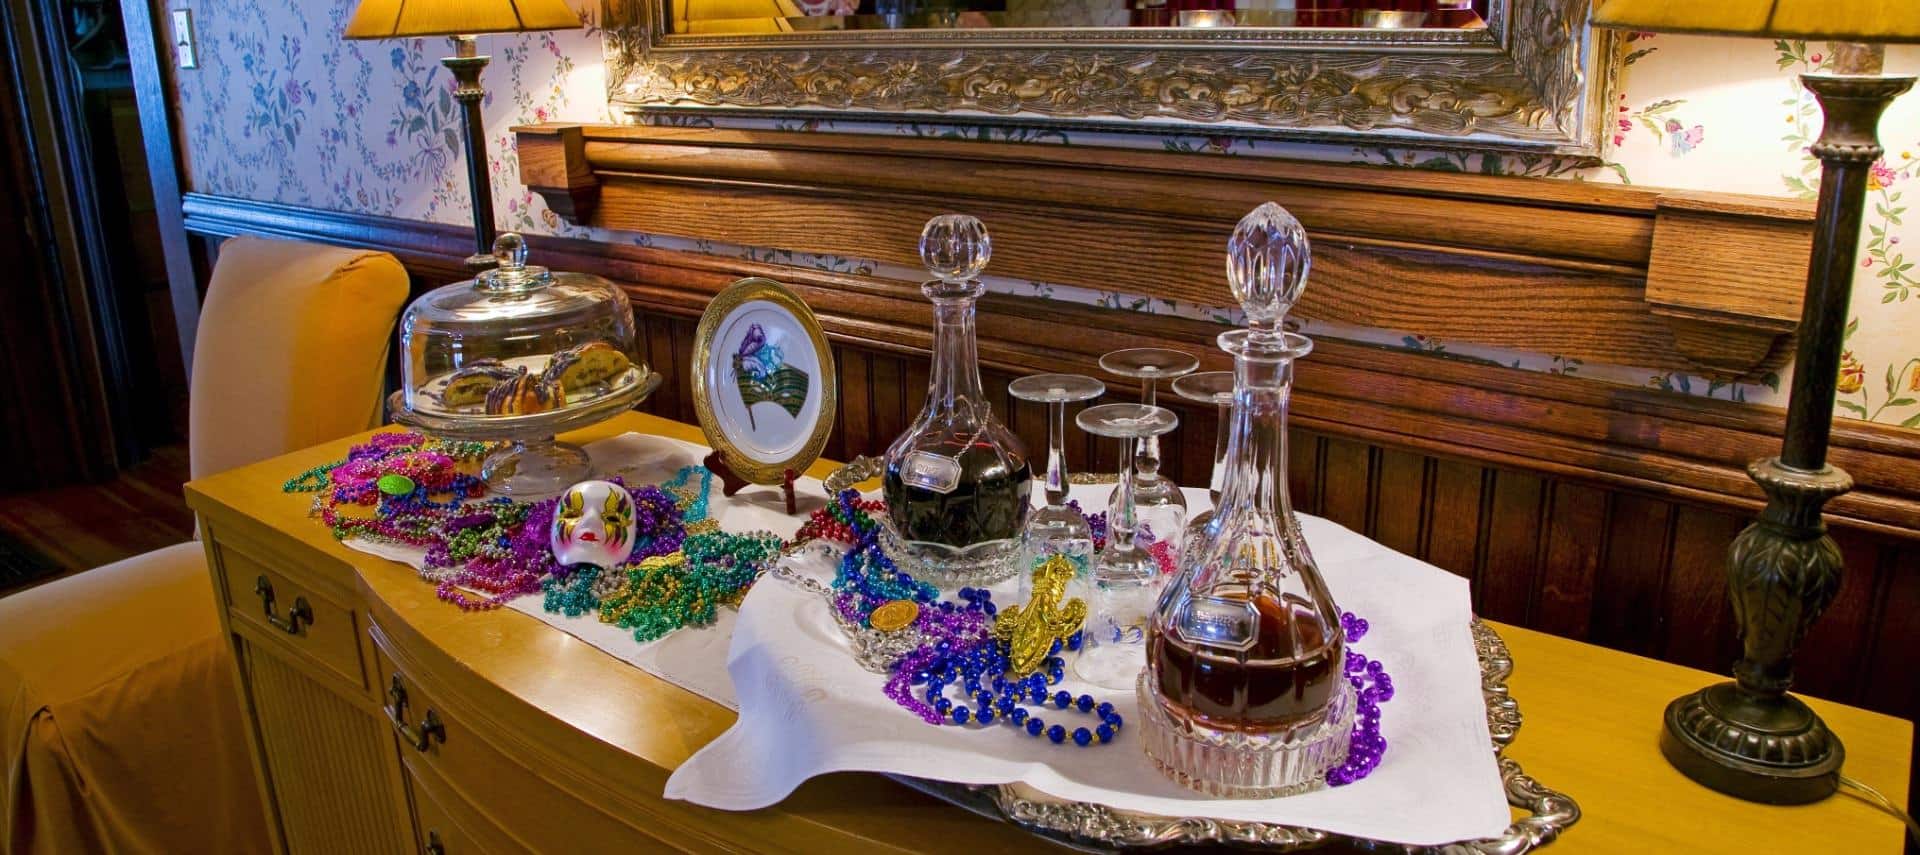 Large wooden buffet topped with Mardi Gras decorations, pastries in glass container, alcohol in glass decanters, and wine glasses